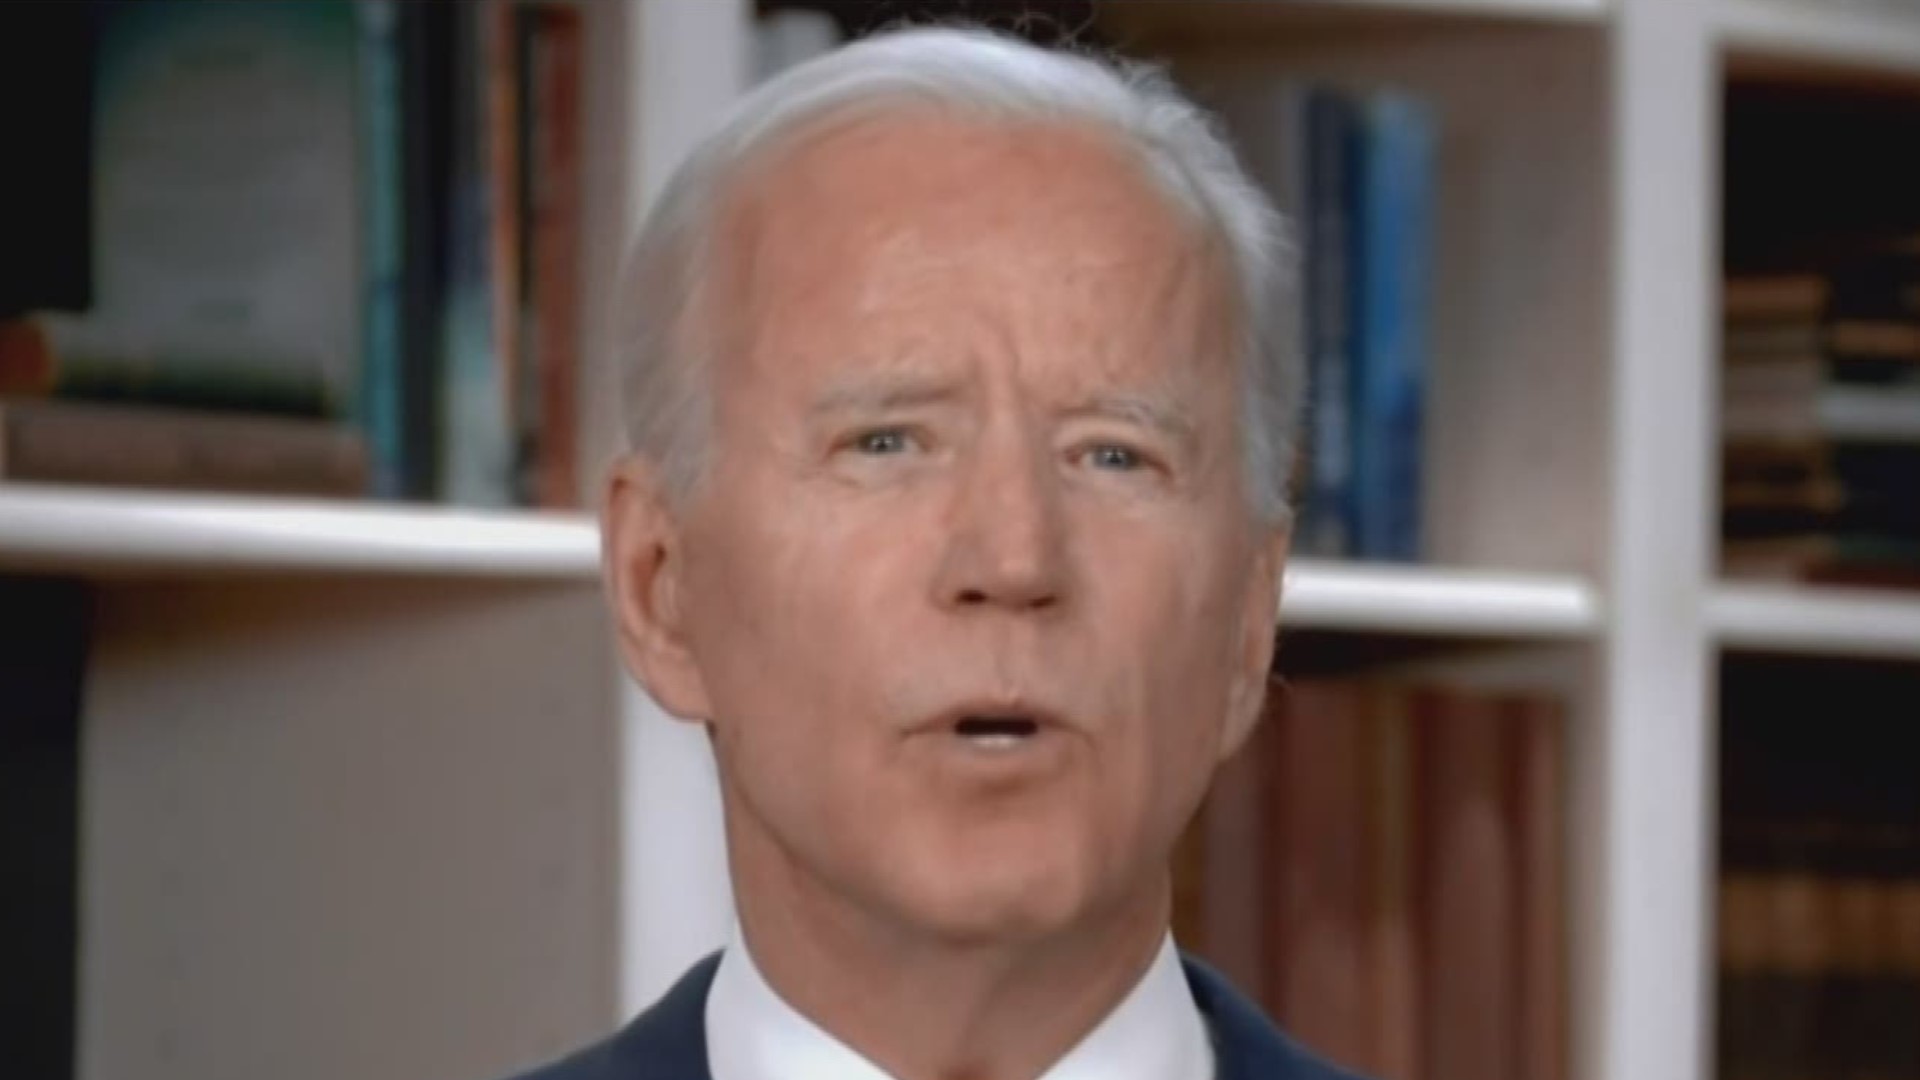 Former Vice President Job Biden left a video message that was played at George Floyd's funeral on Tuesday.